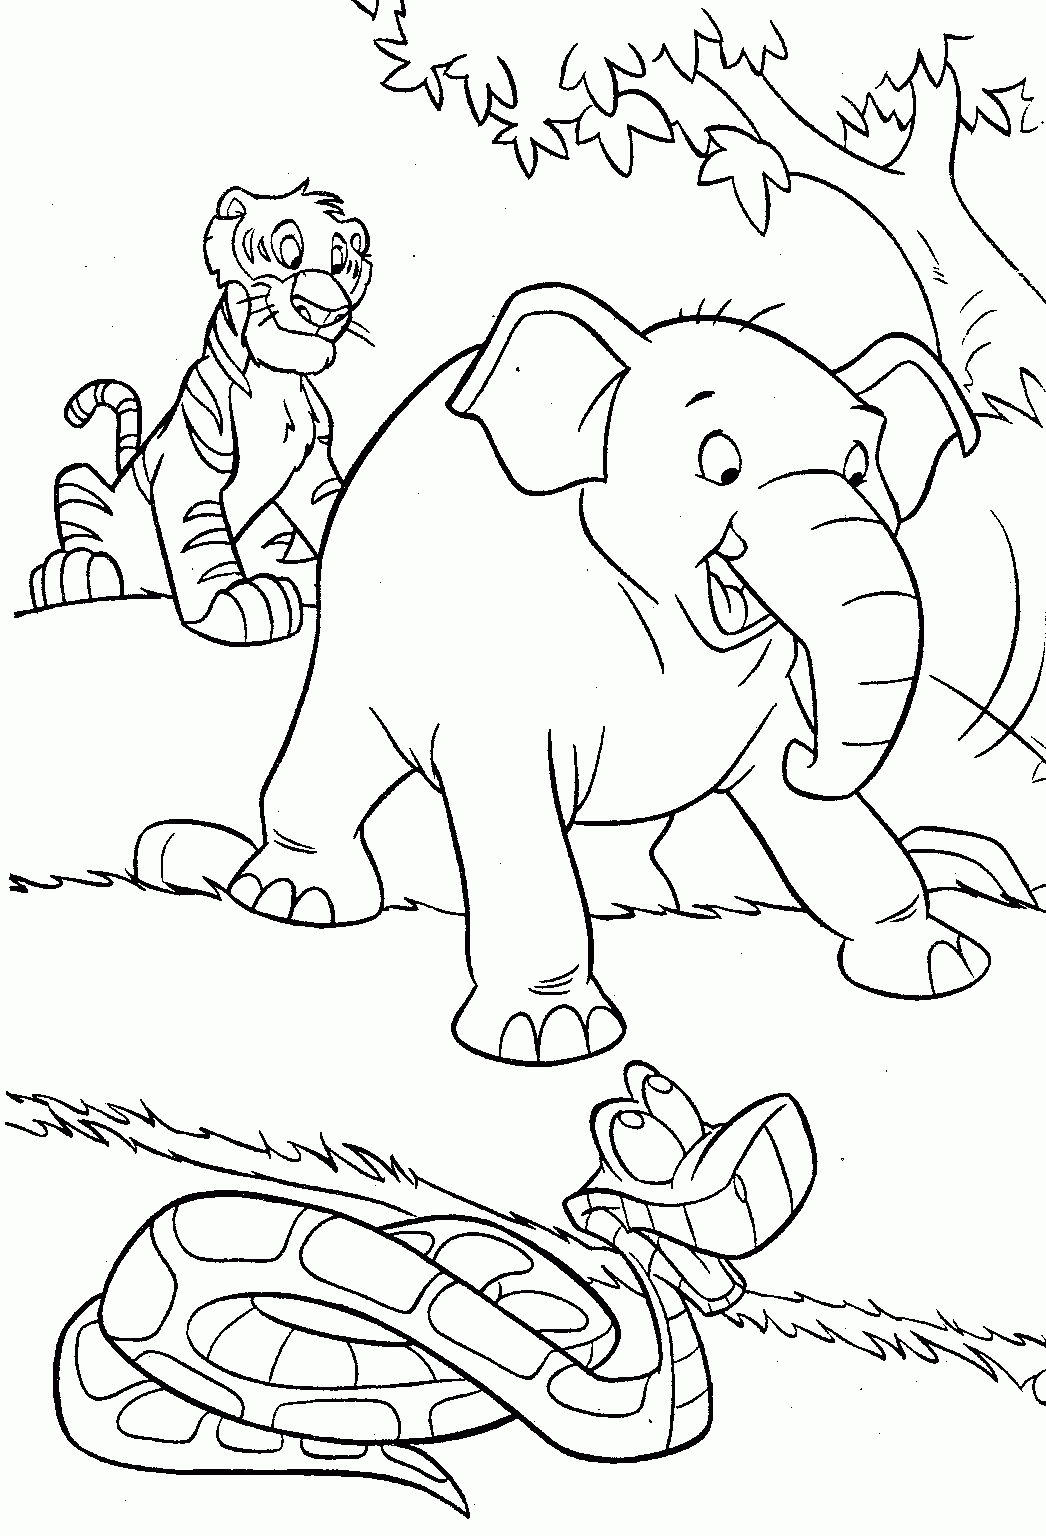 Zoo Scene Coloring Pages - Coloring Page Photos